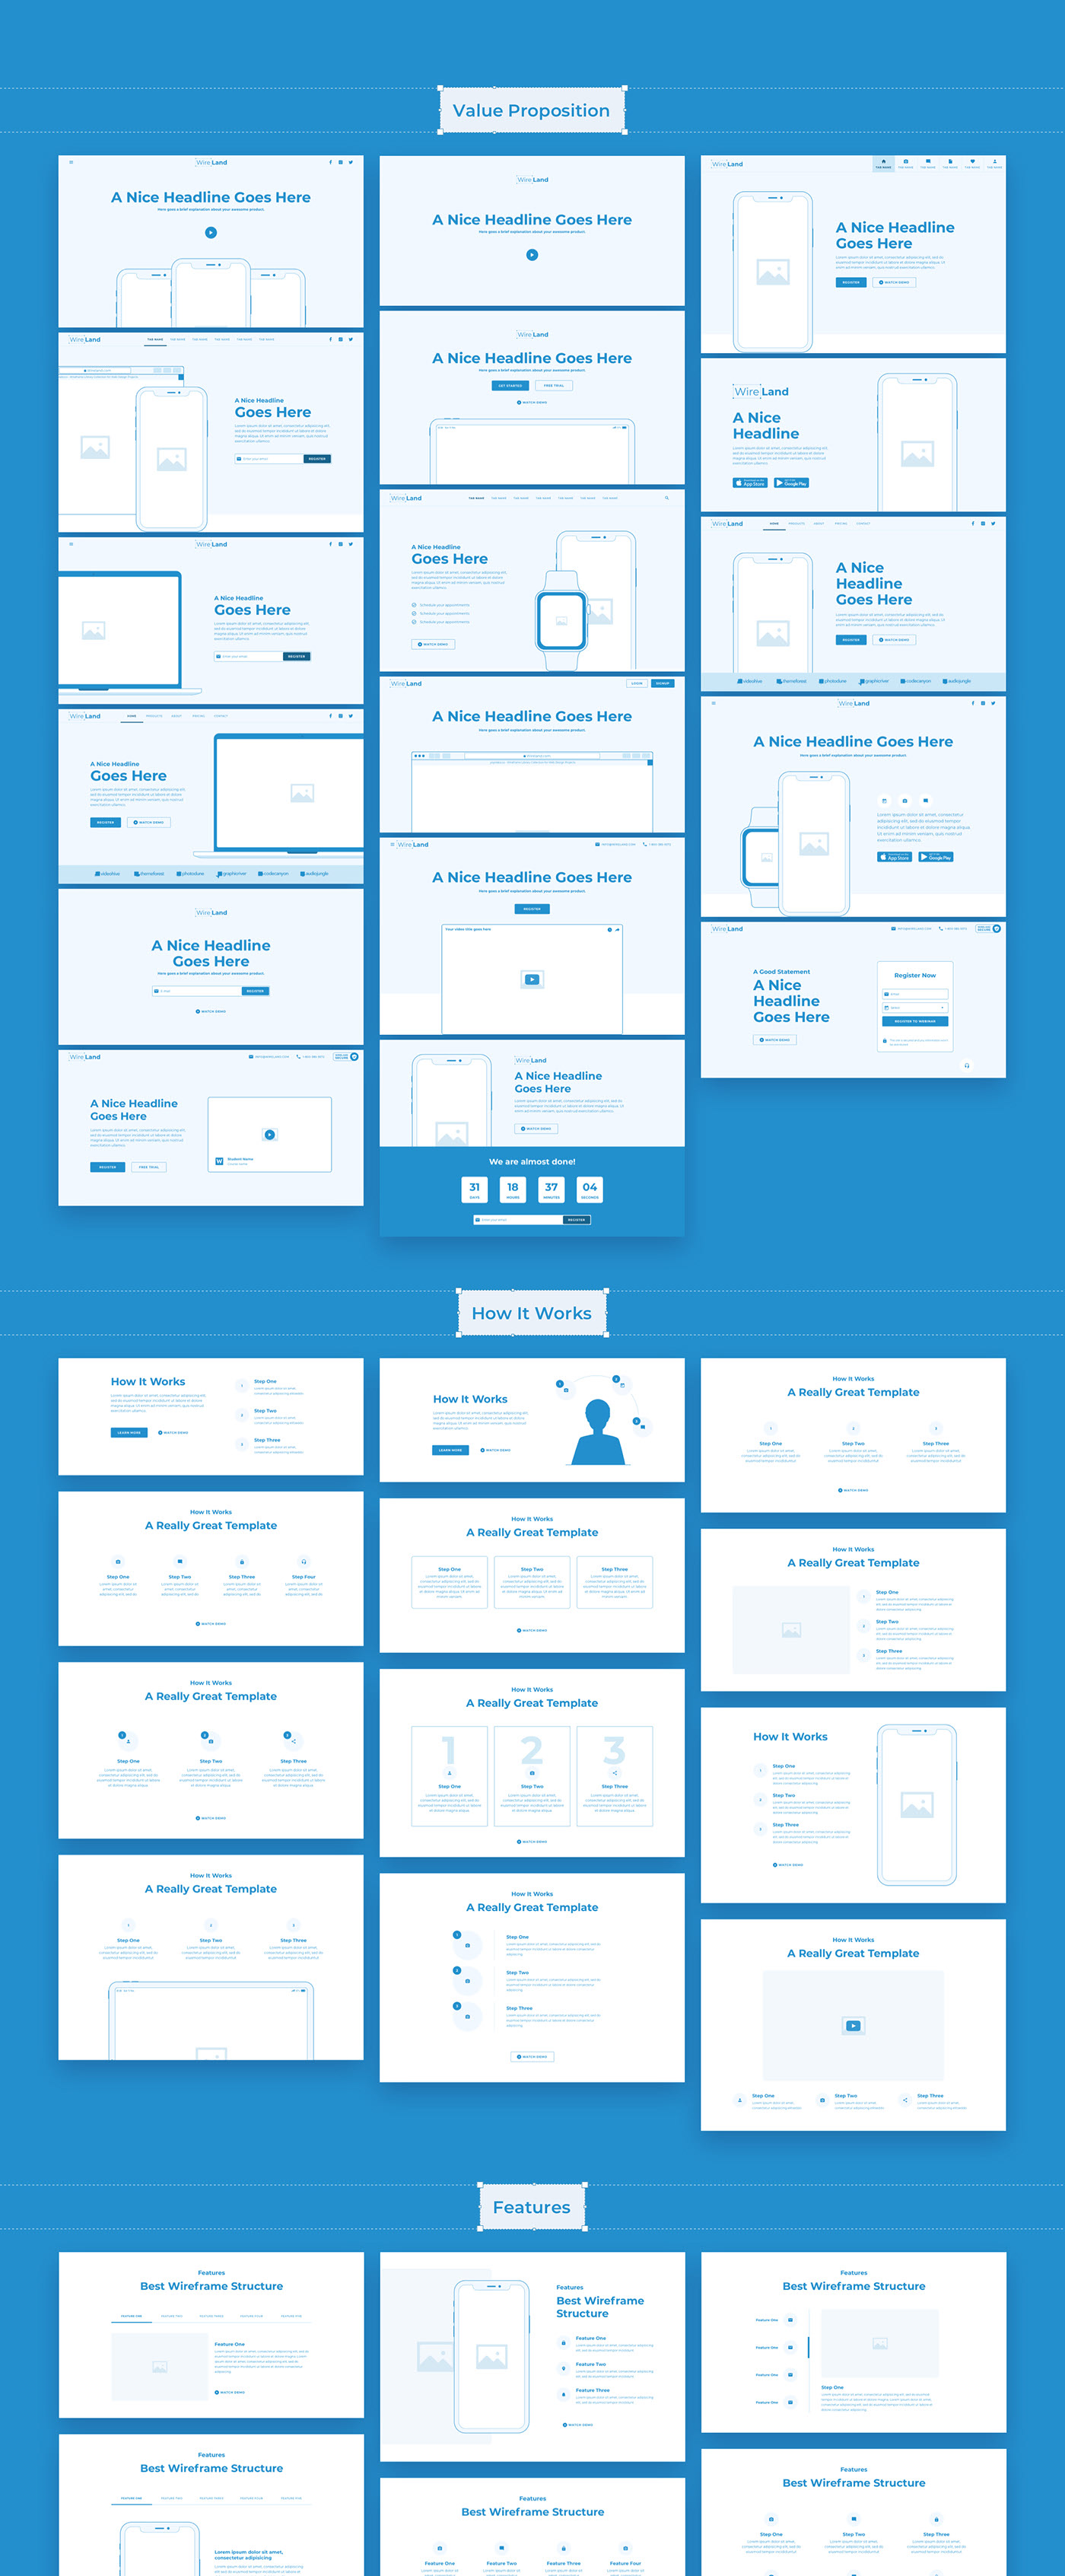 606c2157728315.5f82276d3bc4d - Wireland - Wireframe Library for Web Design Projects - Sketch Template